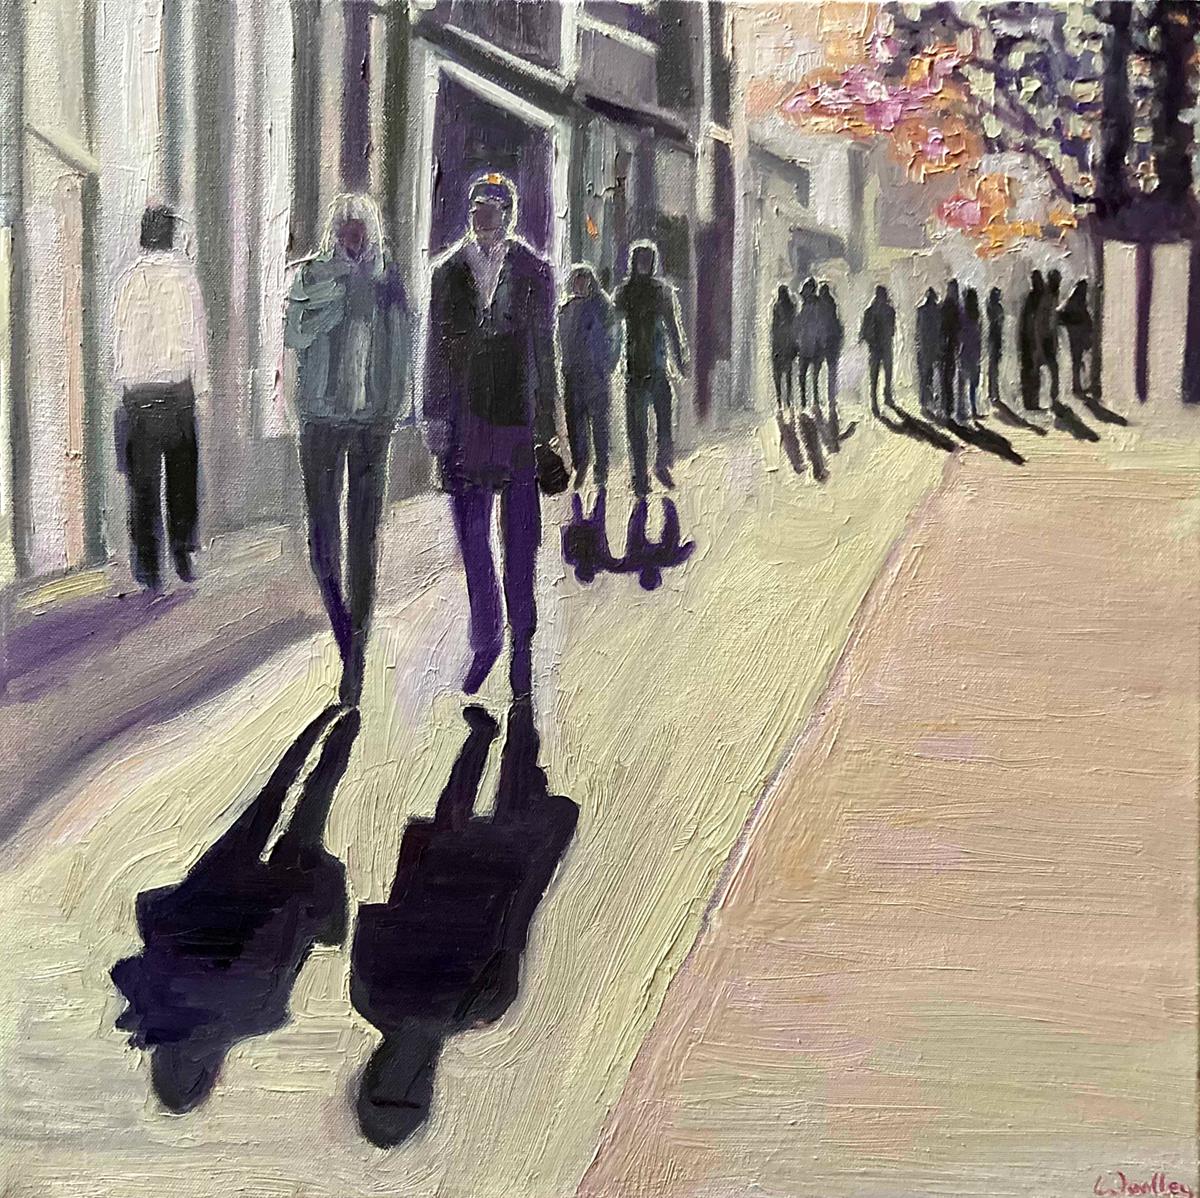 Promenade Shadows is an Original Painting by Eleanor Woolley. This painting was started Plein air and finished in the studio. The Artist's inspiration comes from the play of dark and light, and the long shadows cast by the morning sun. 'I love the